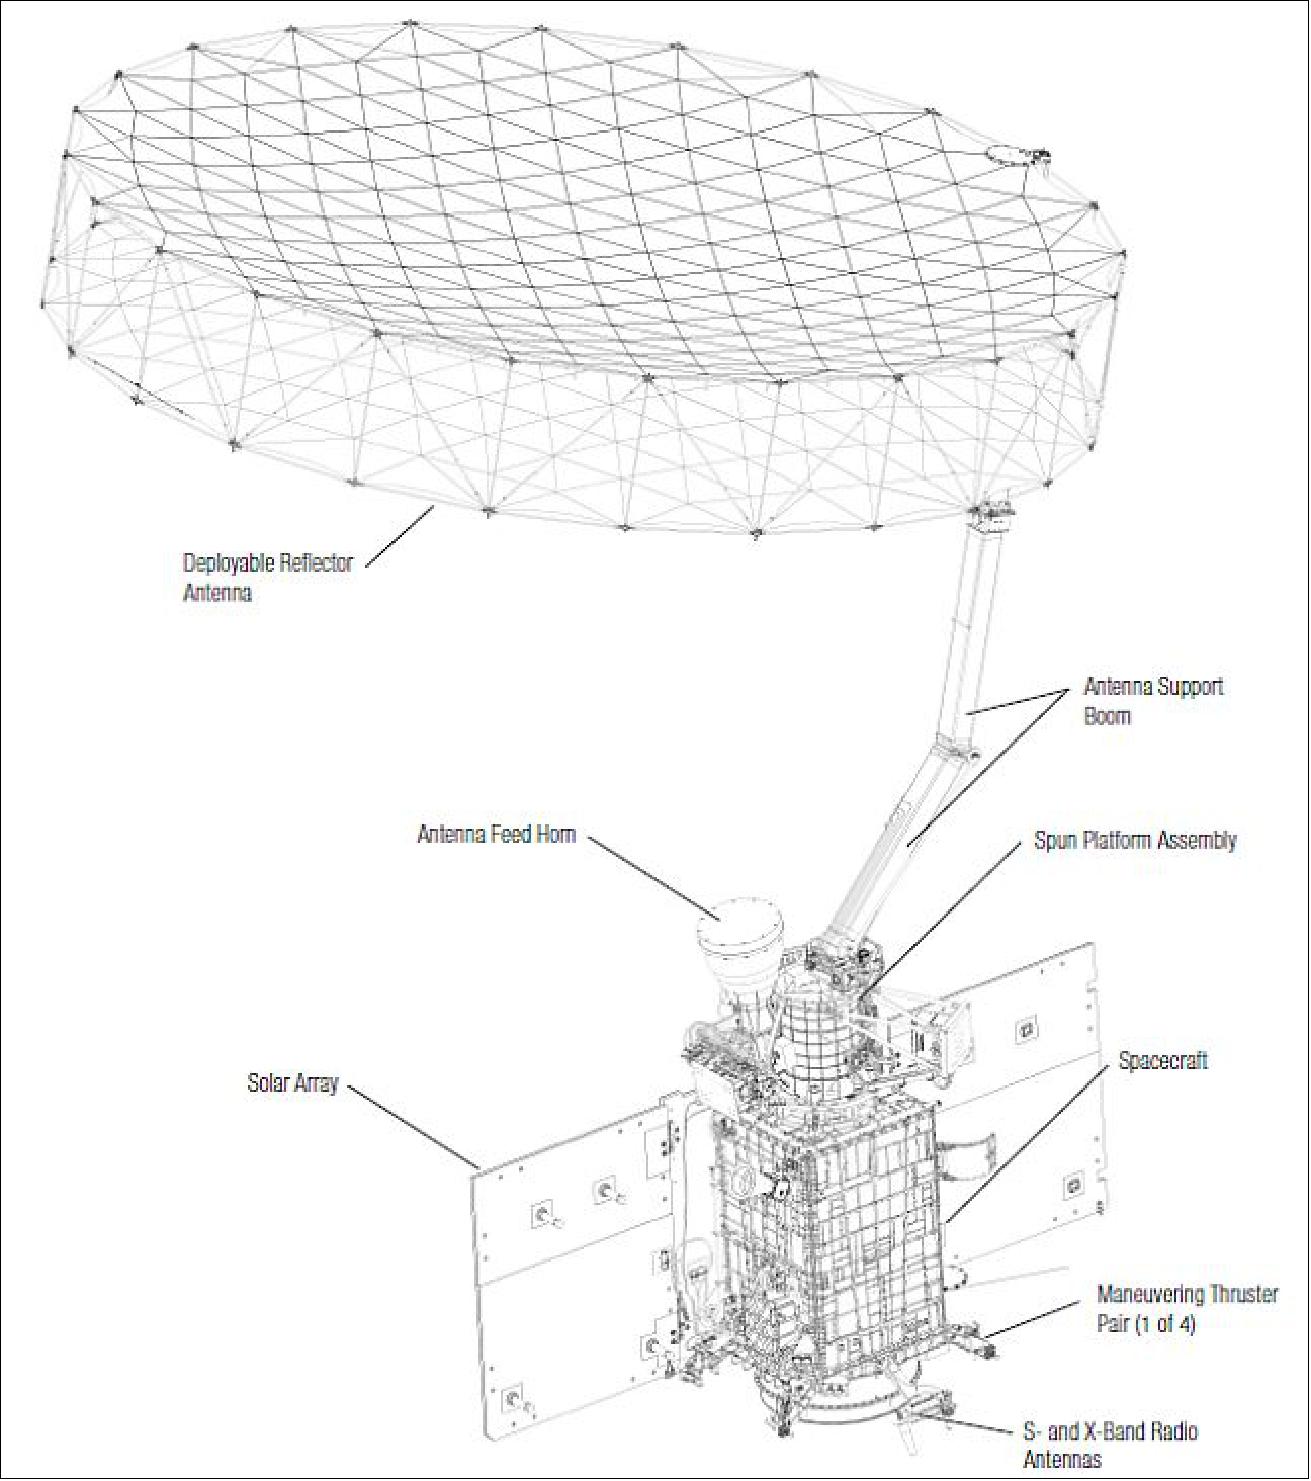 Figure 12: Line drawing of the deployed SMAP spacecraft (image credit: NASA, Ref. 26)